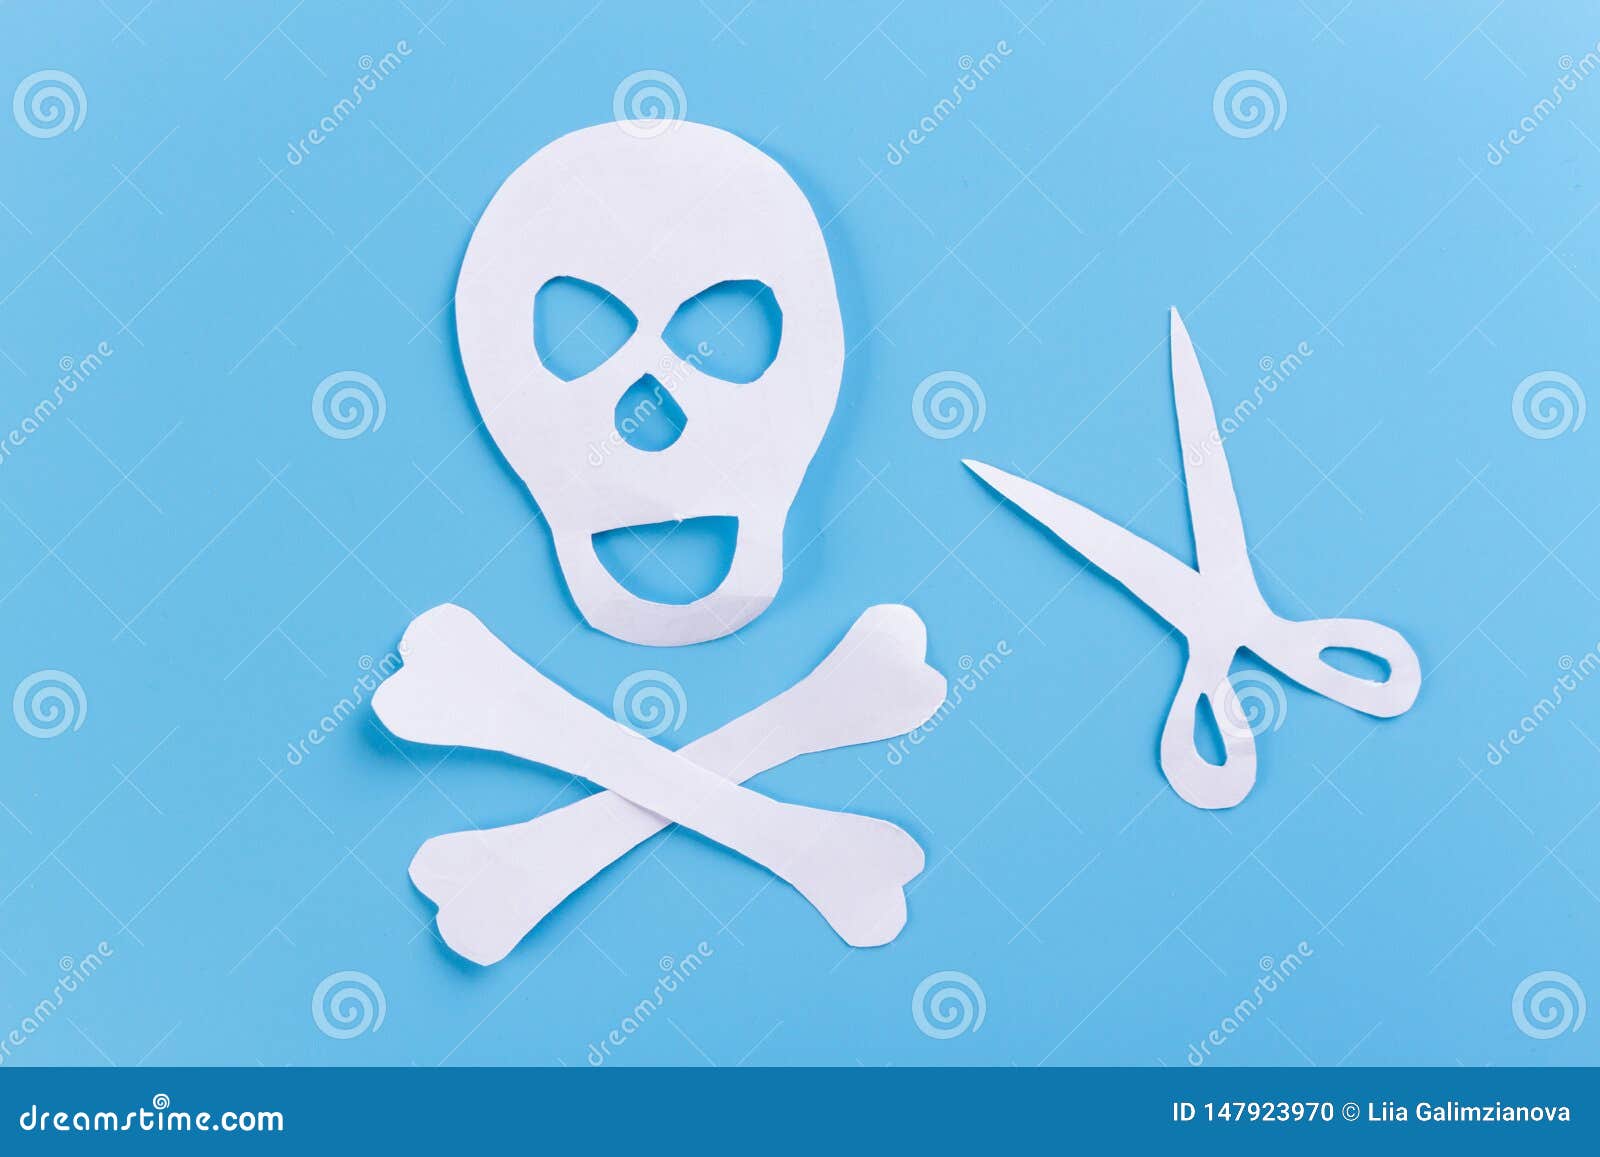 Scissors and a skull stock photo. Image of quality, grooming - 147923970